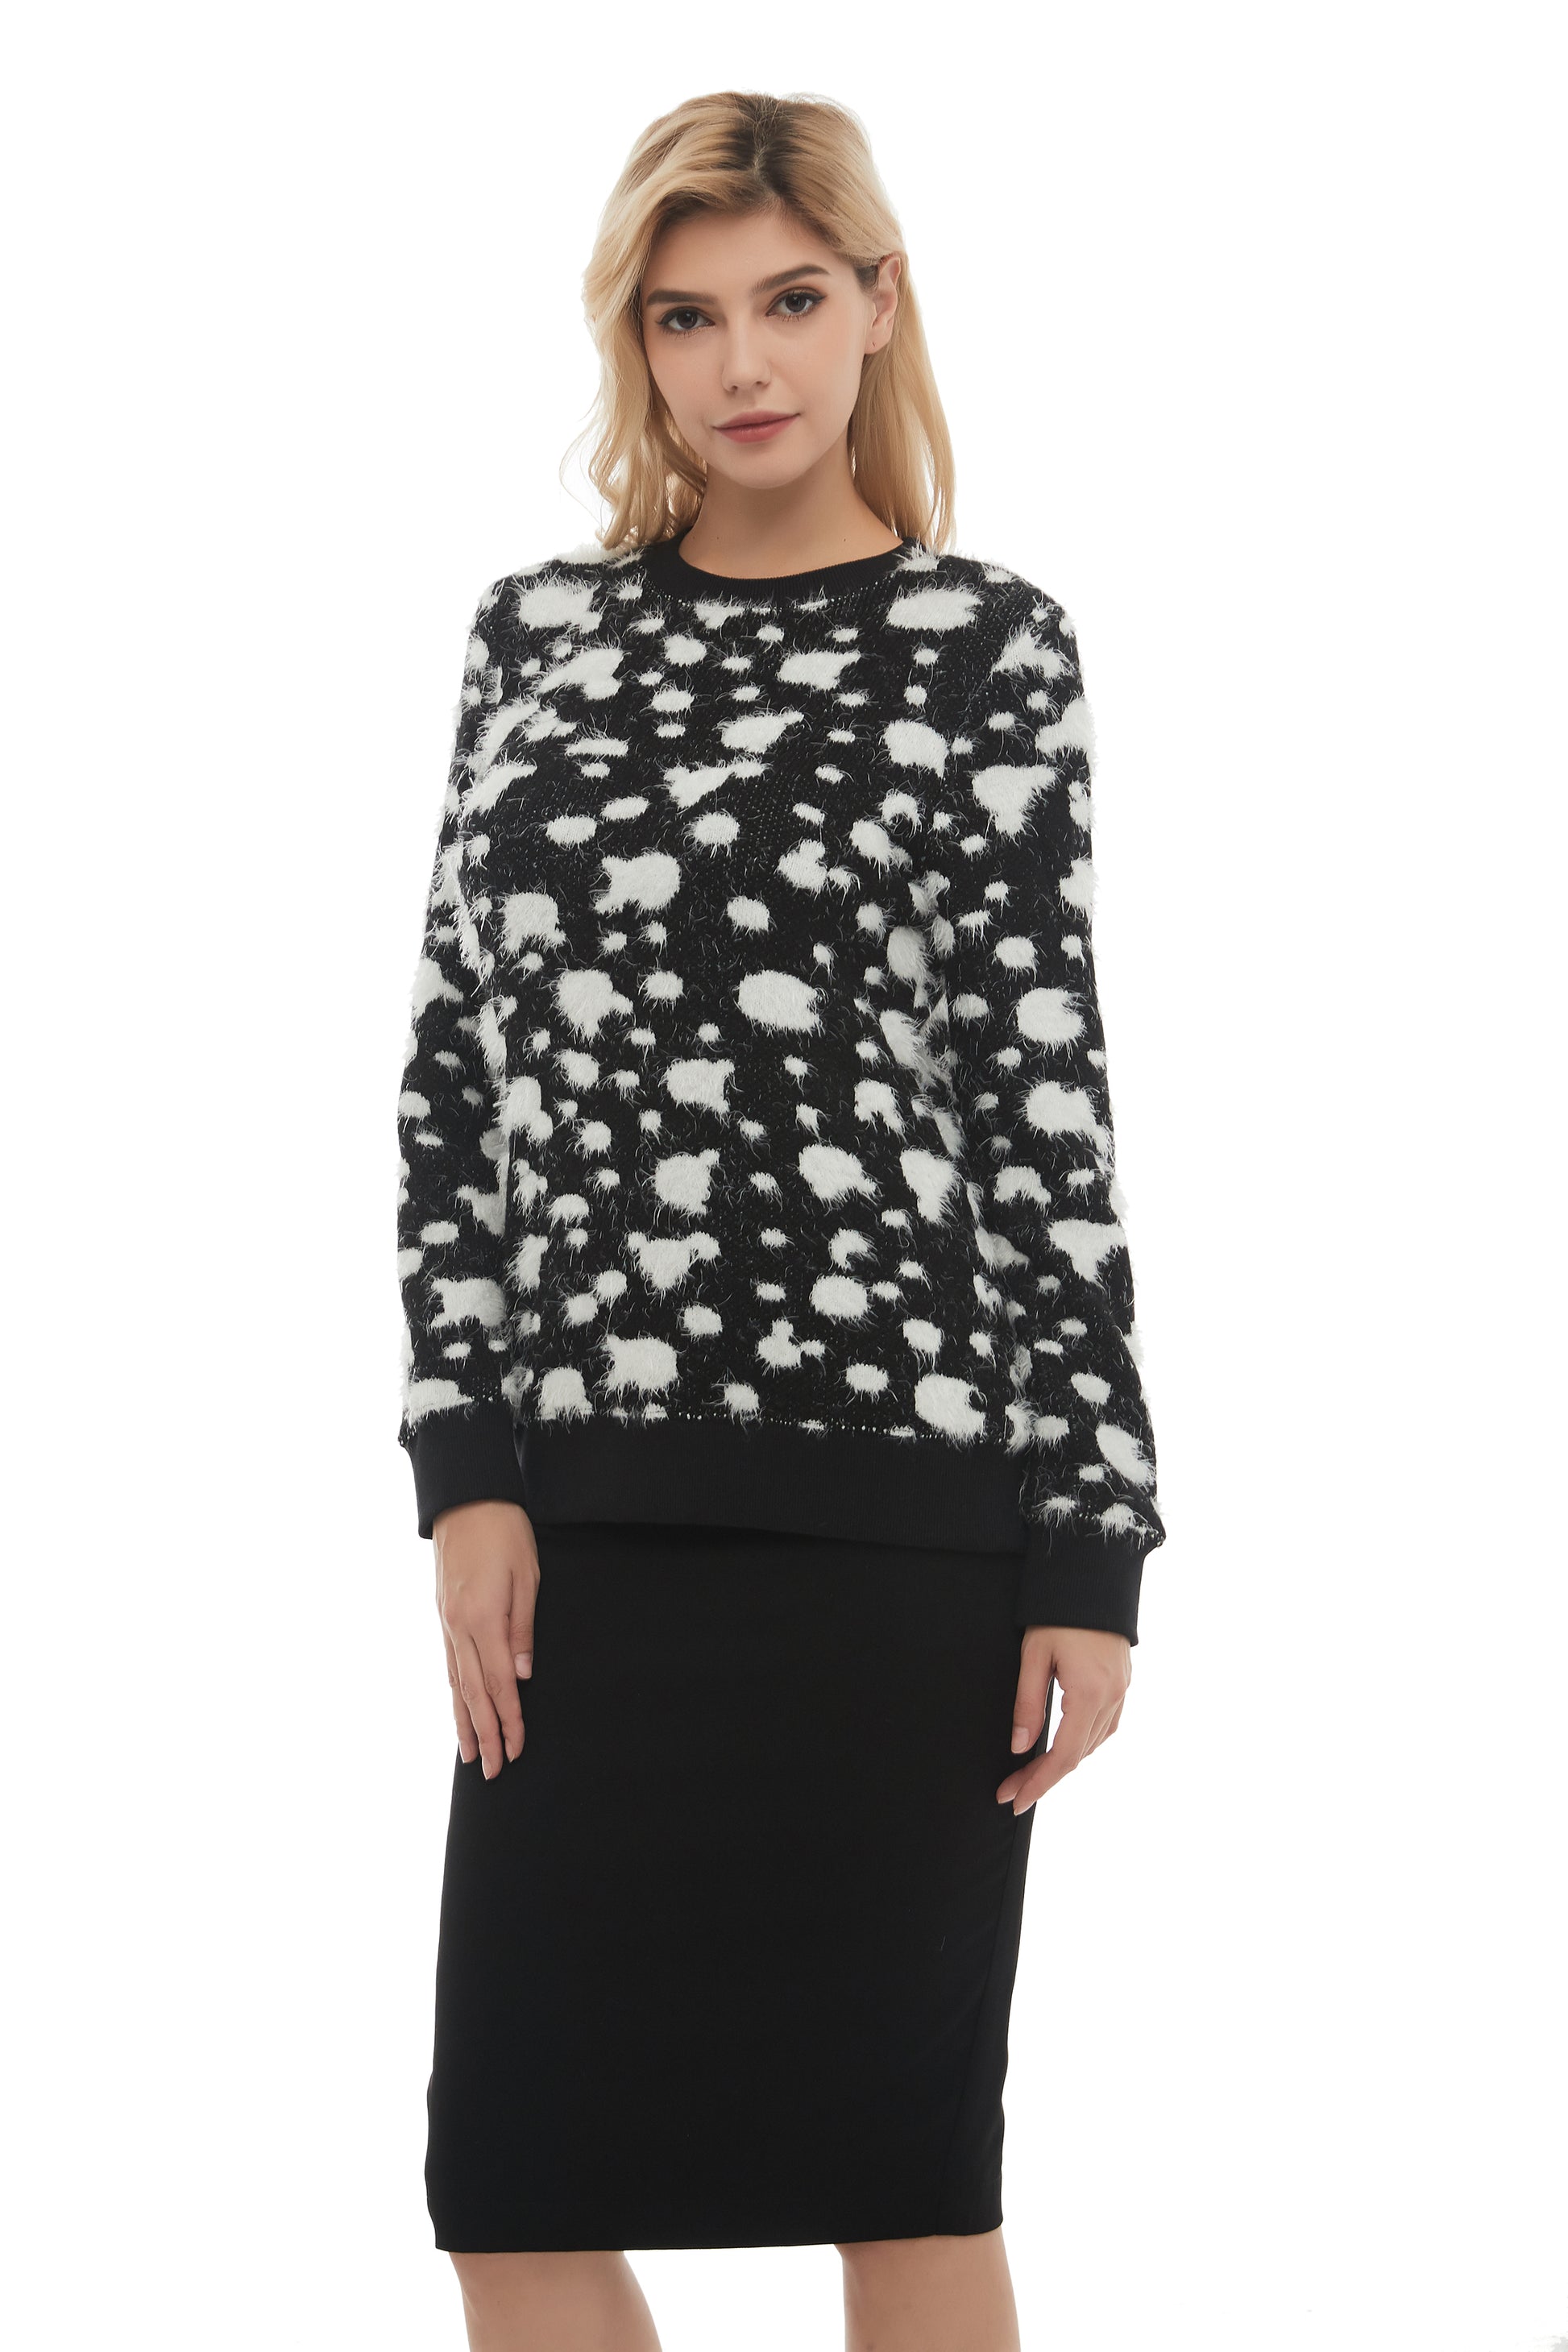 Long Sleeve Modest Mohair Black & White Sweater Top - seilerlanguageservices